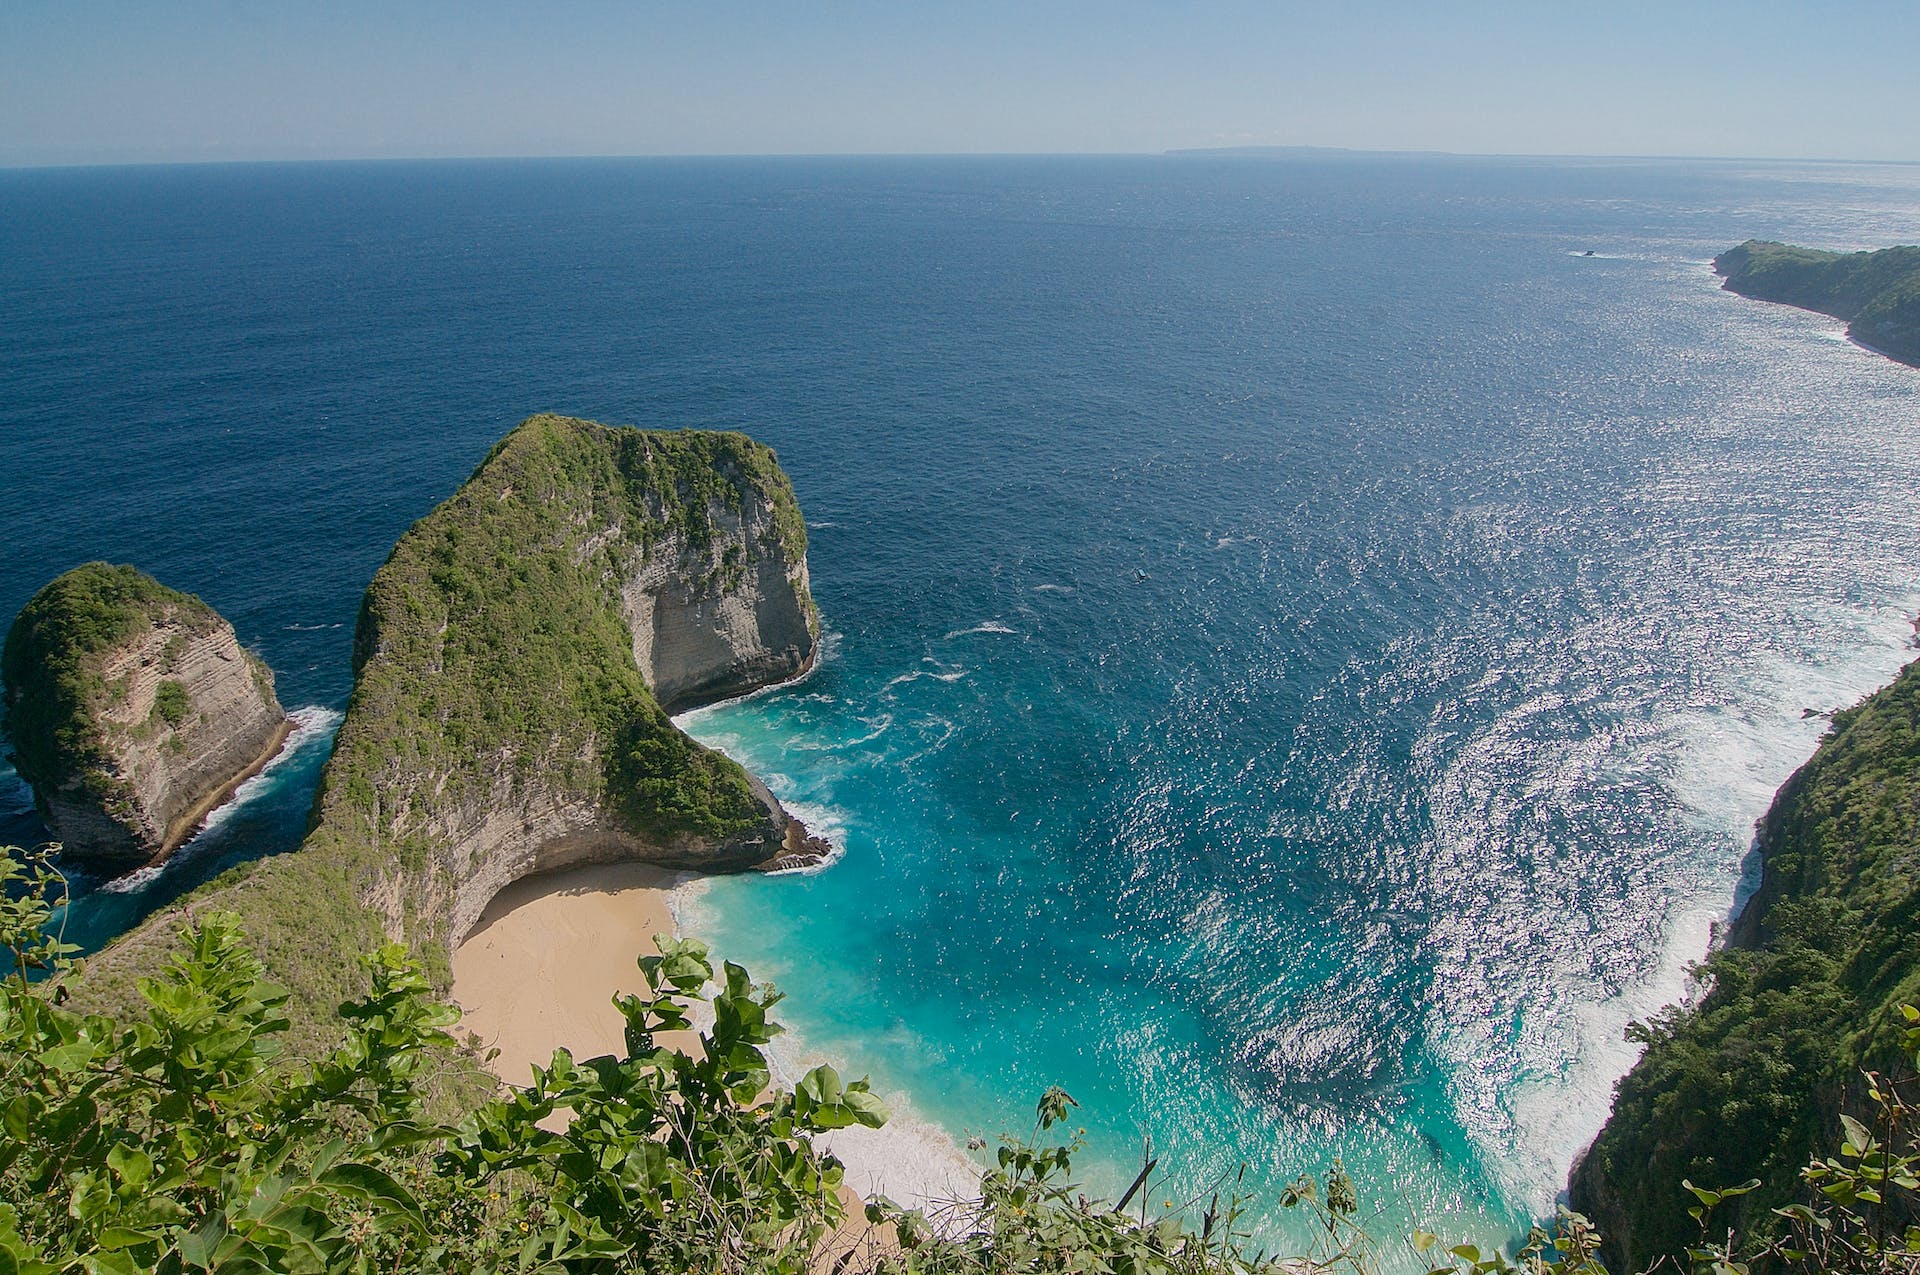 When Is The Best Time To Visit Bali?